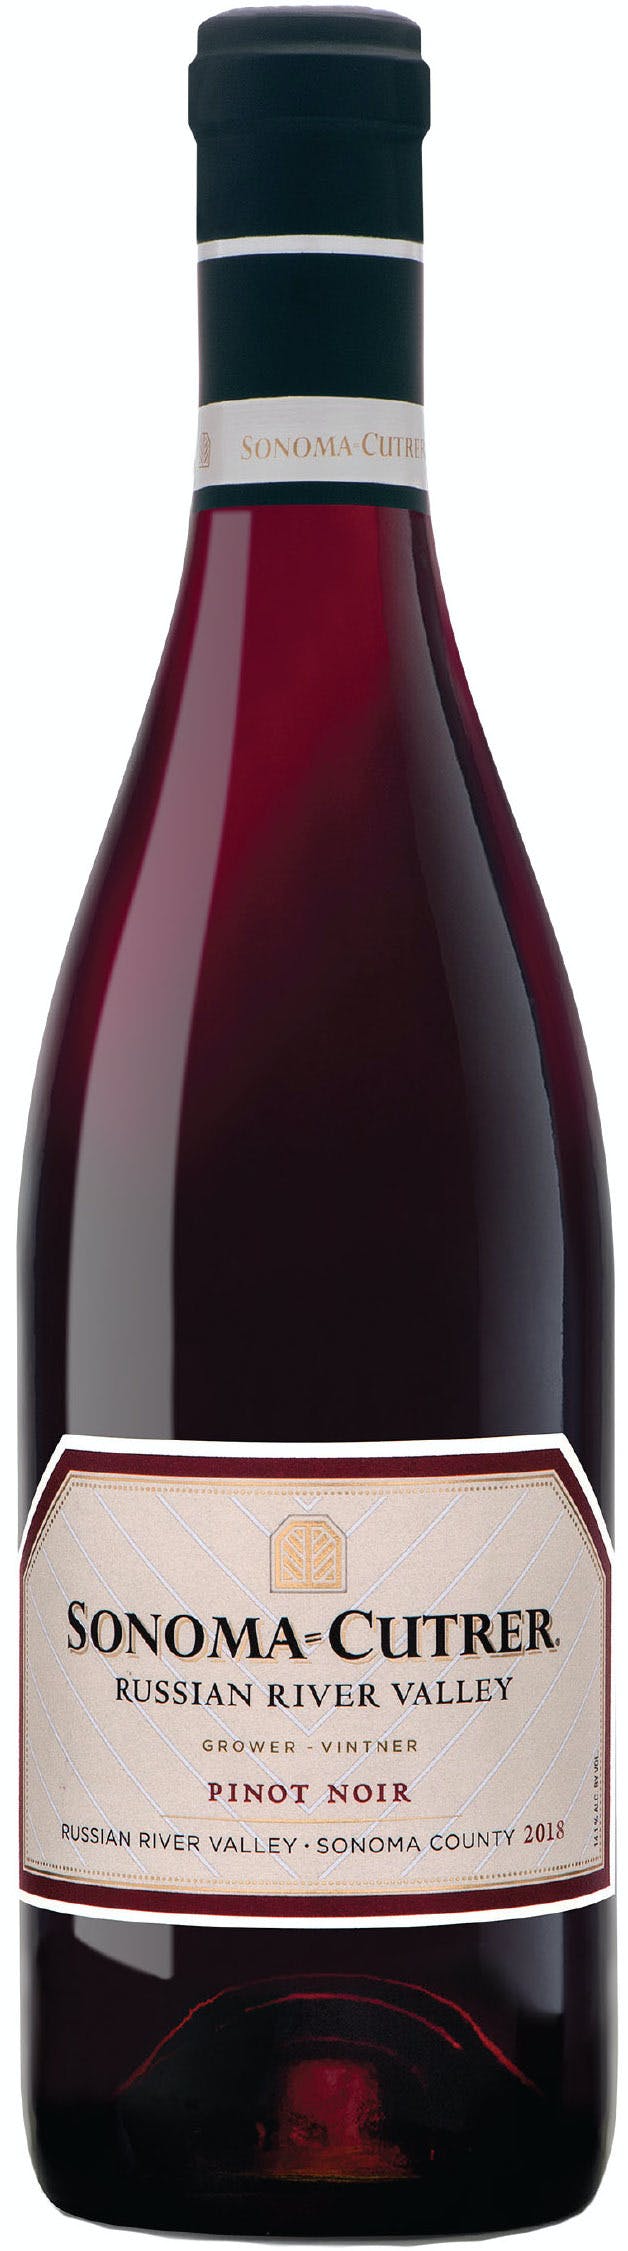 Sonoma-Cutrer Russian River Ranches Pinot Noir 2018